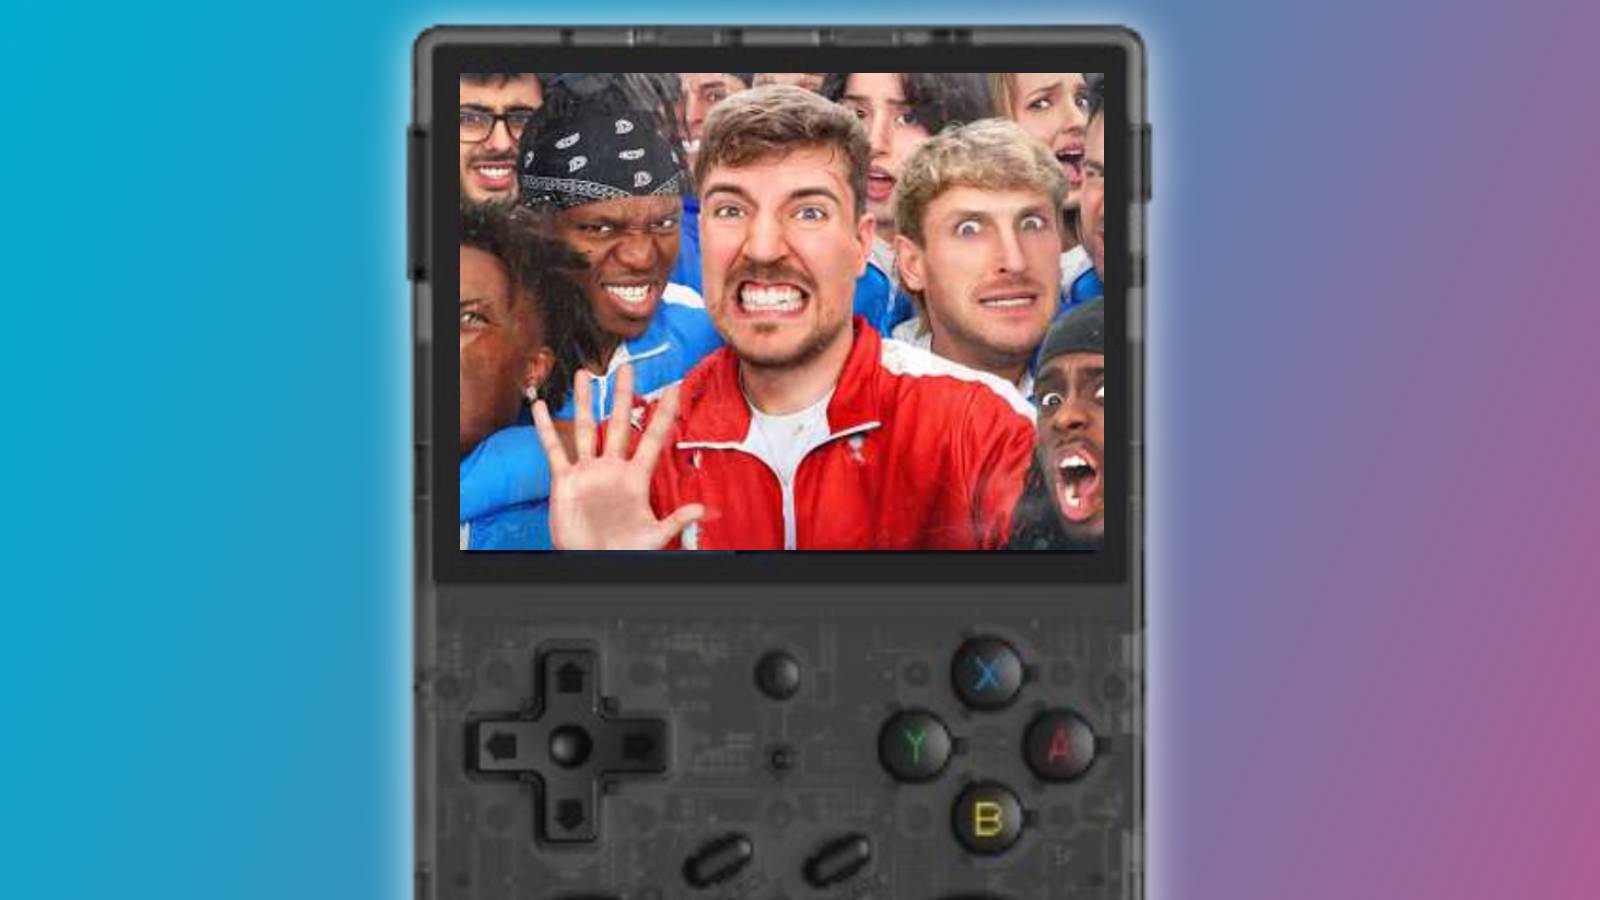 A thumbnail for a MrBeast on the display of an Anbernic handheld, with a blue and pink background.